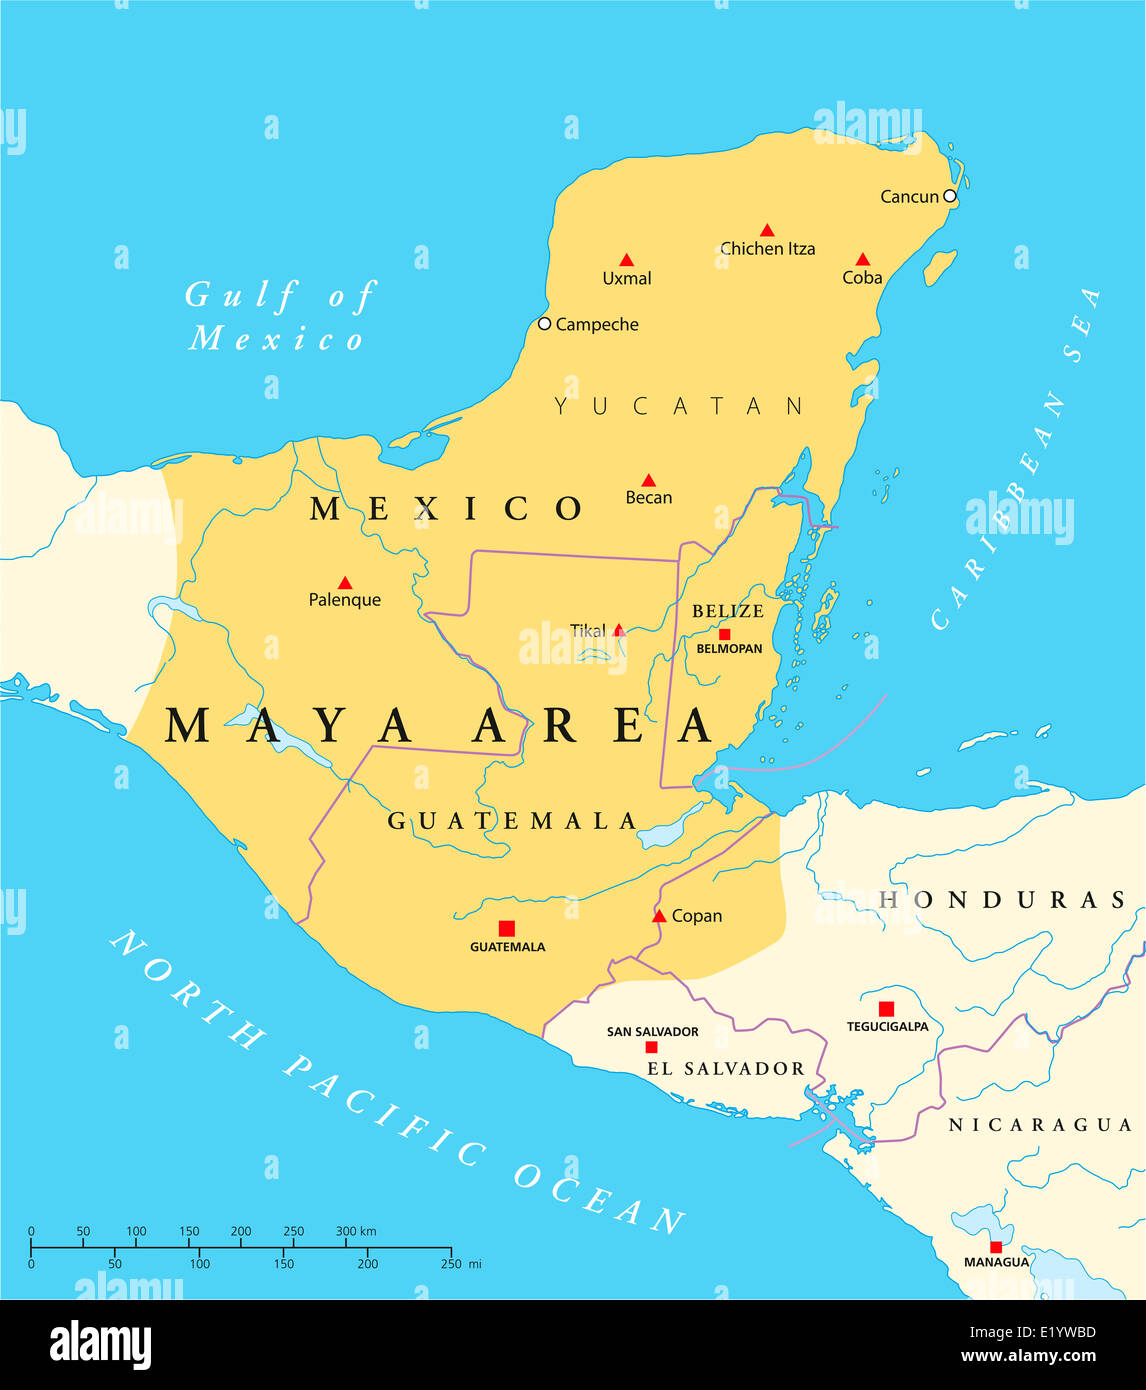 Maya High Culture Area Map - Political map with capitals, national borders, most important ancient cities, rivers and lakes. Stock Photo